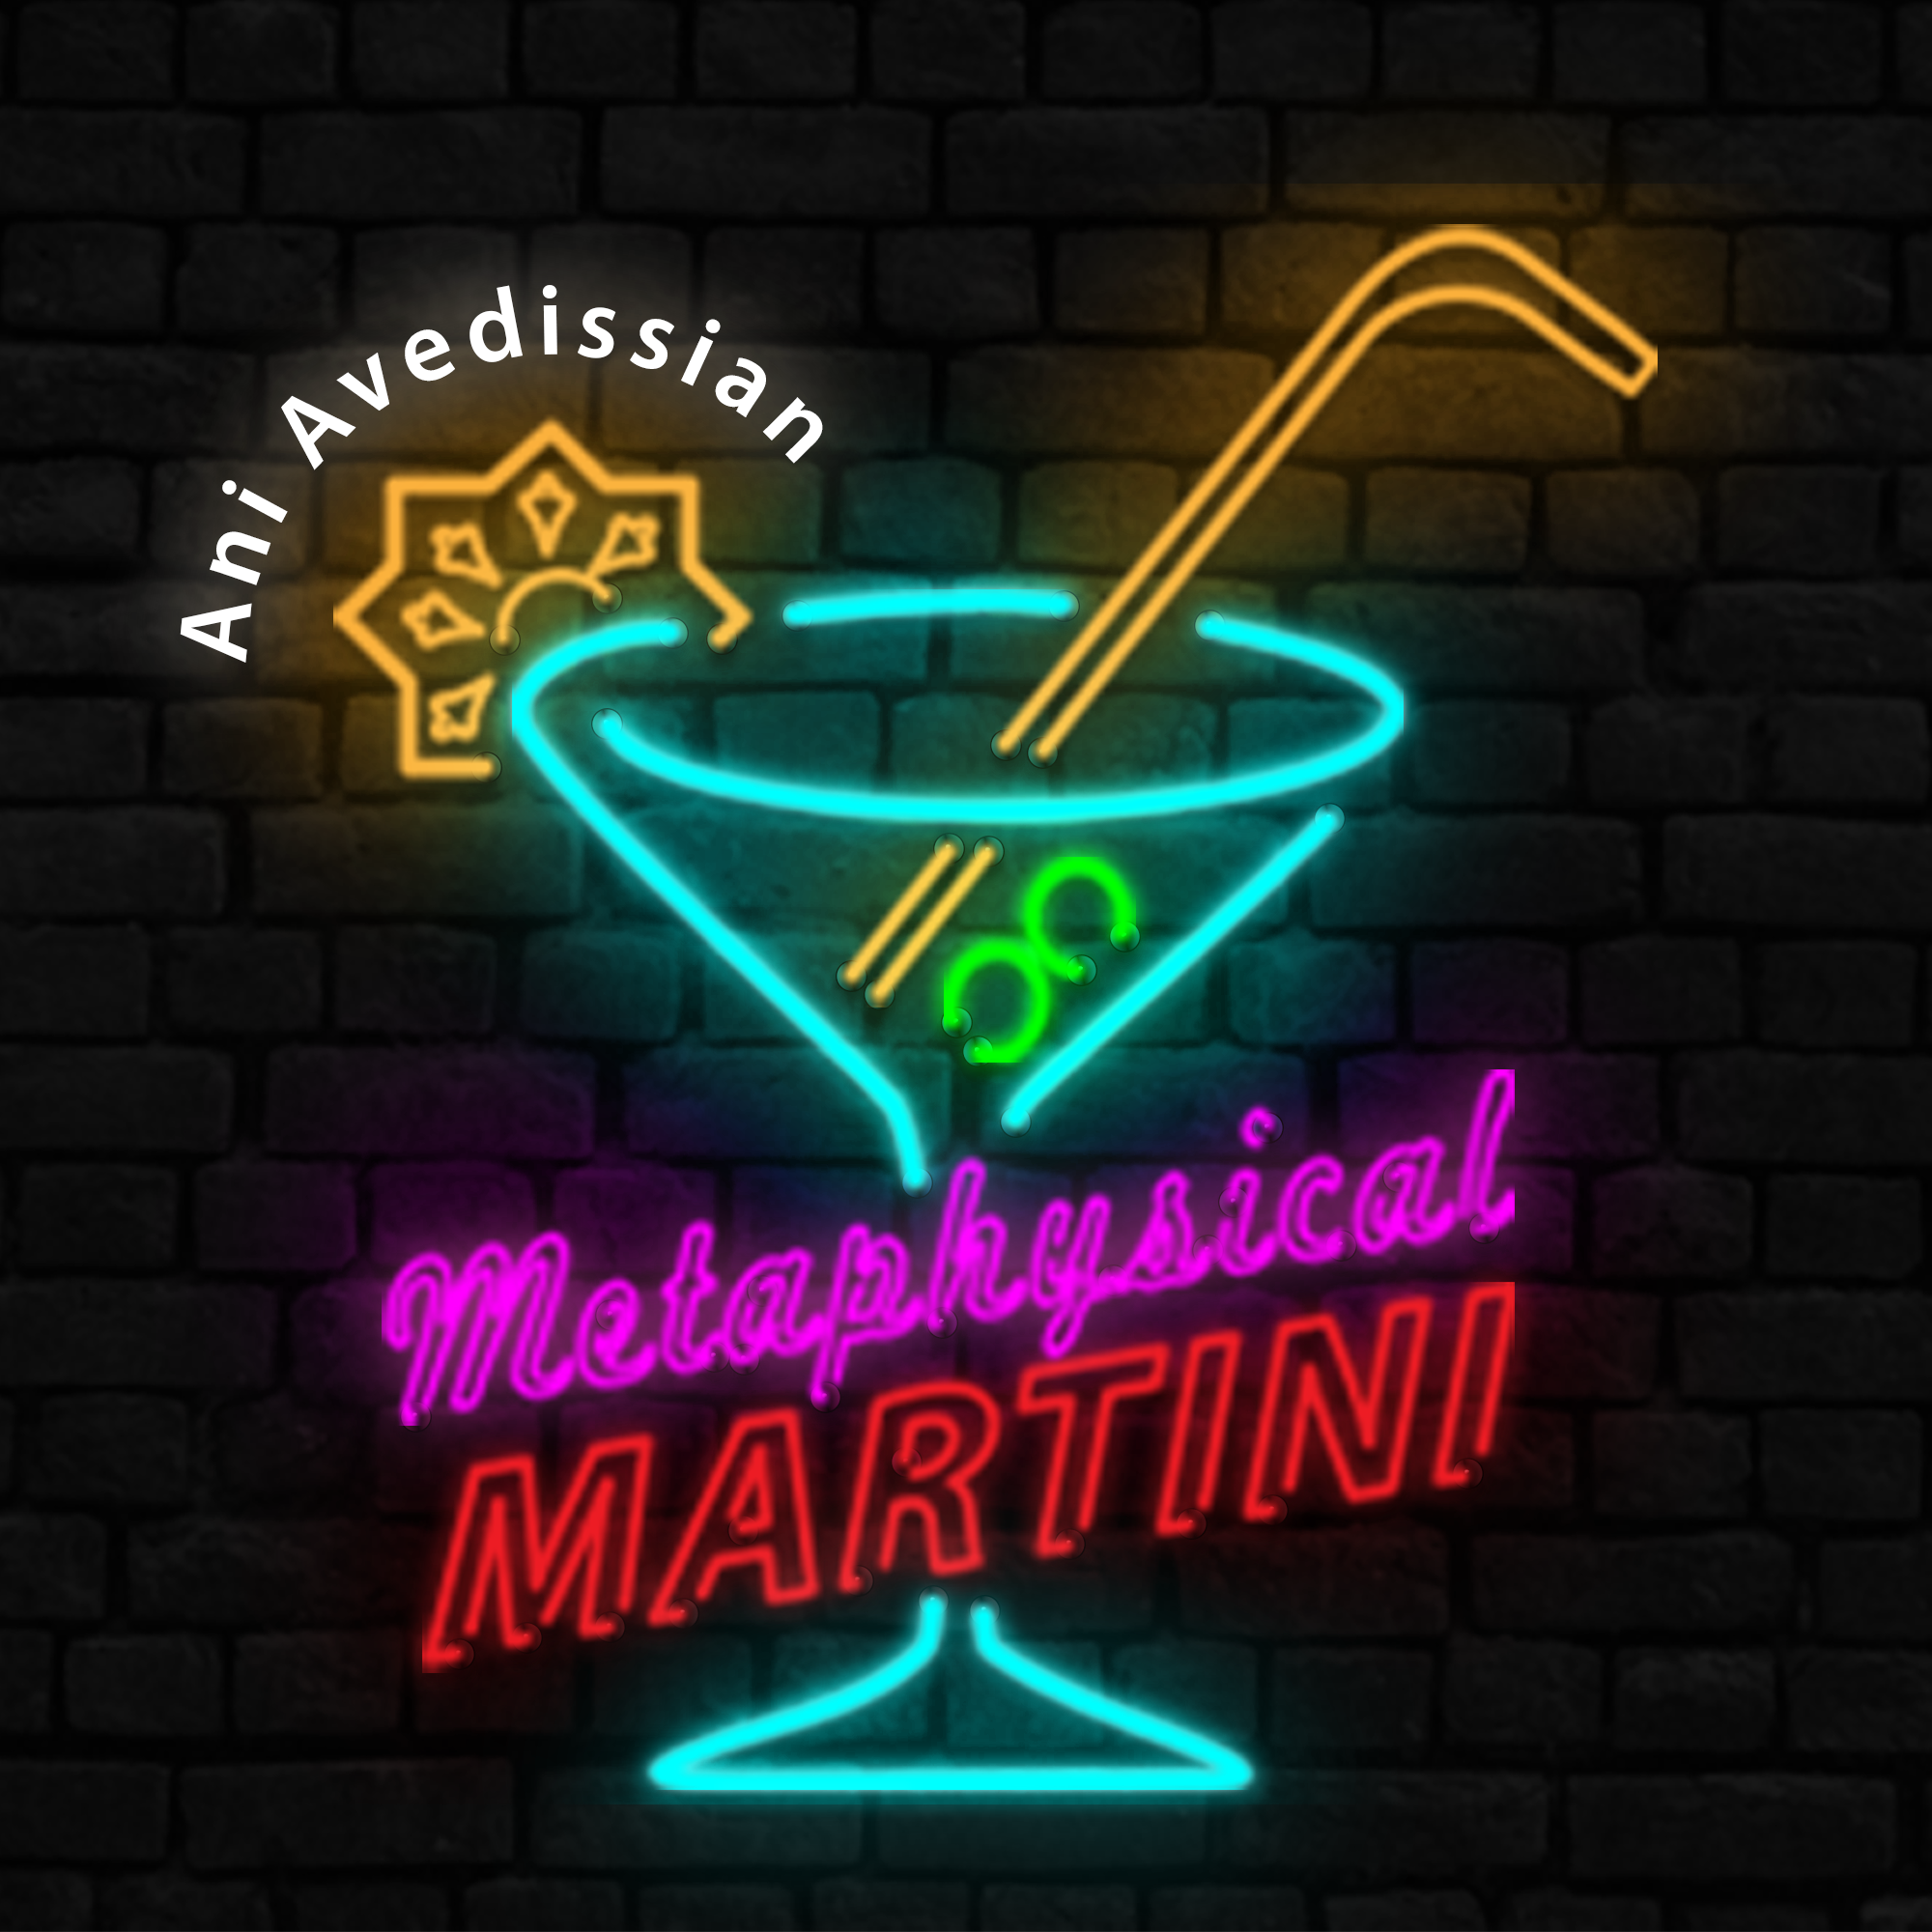 "Metaphysical Martini"   10/12/2022  - Are we addicted to suffering?  Why?